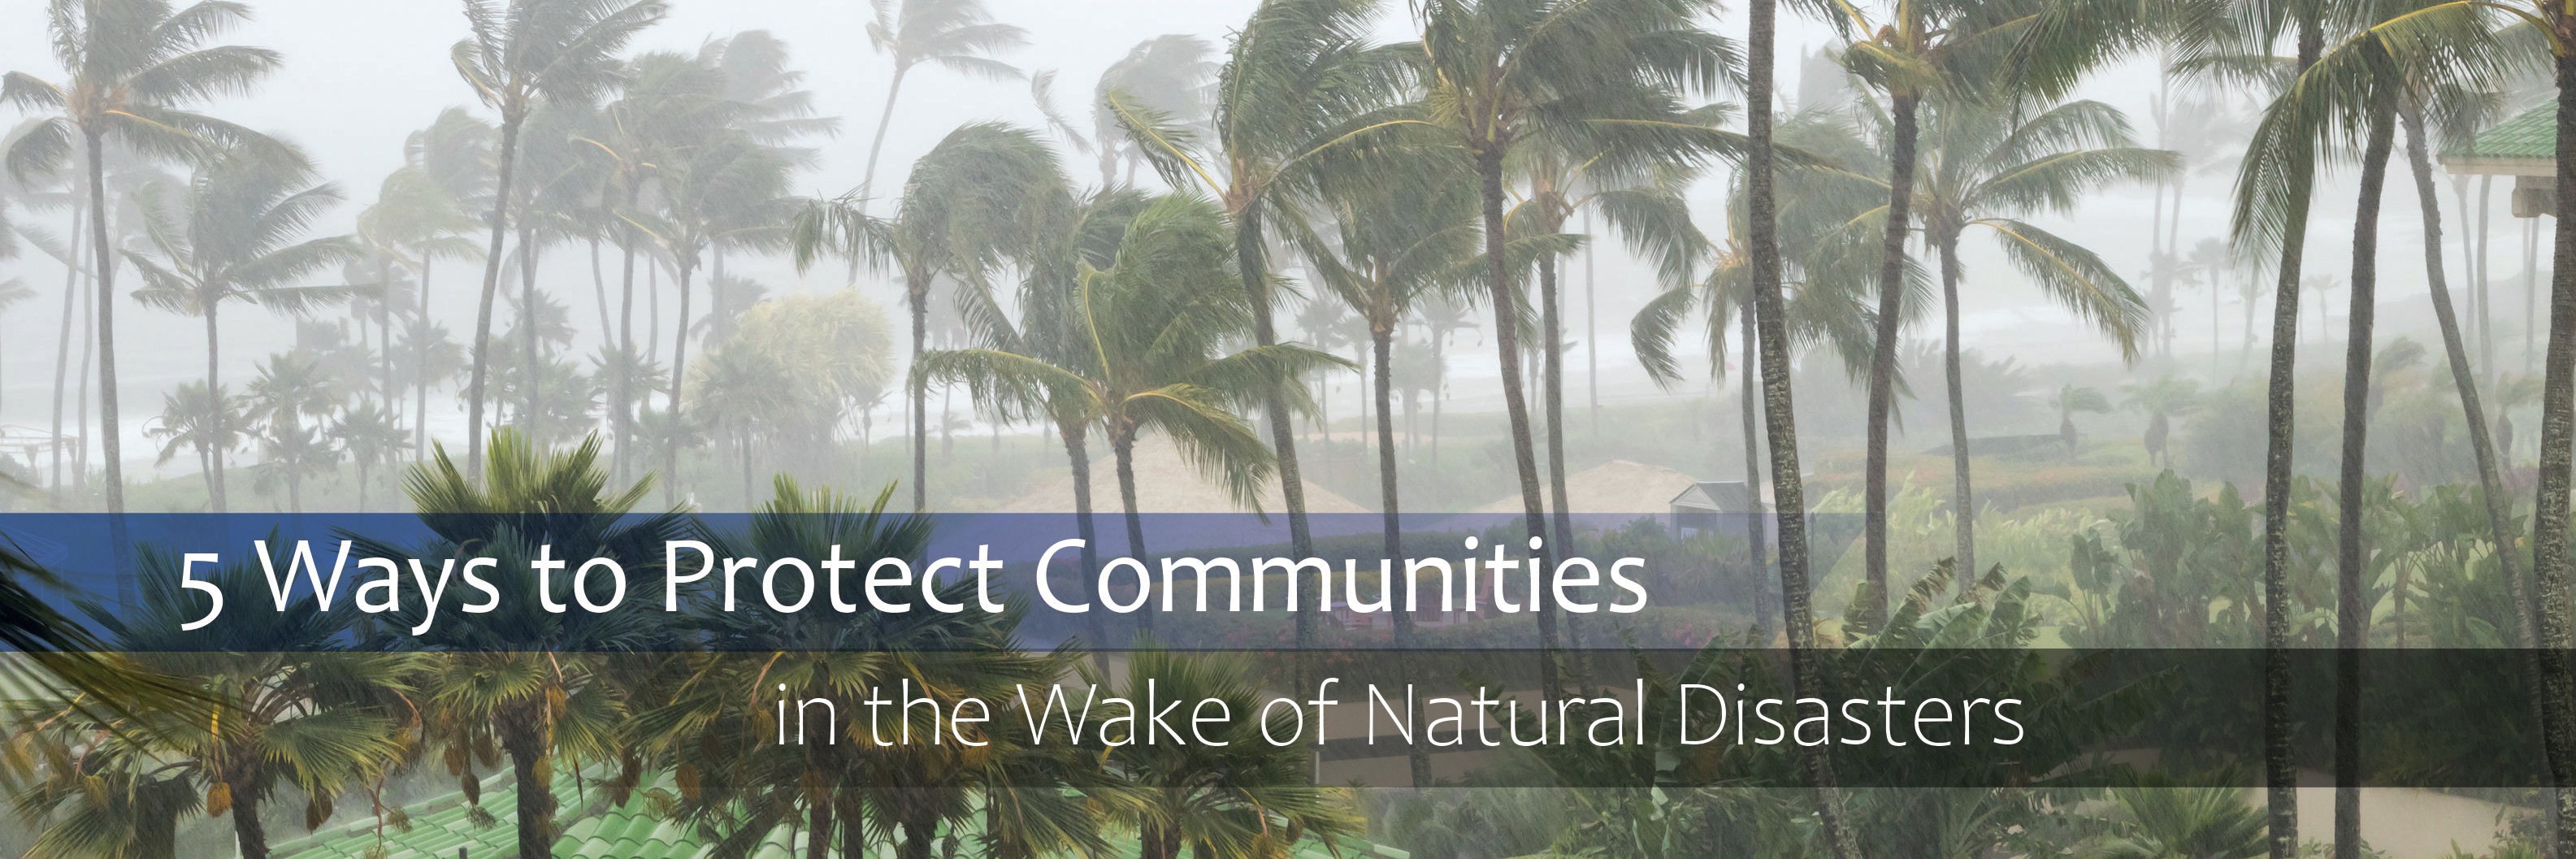 5 Ways to Protect Communities in the Wake of Natural Disasters